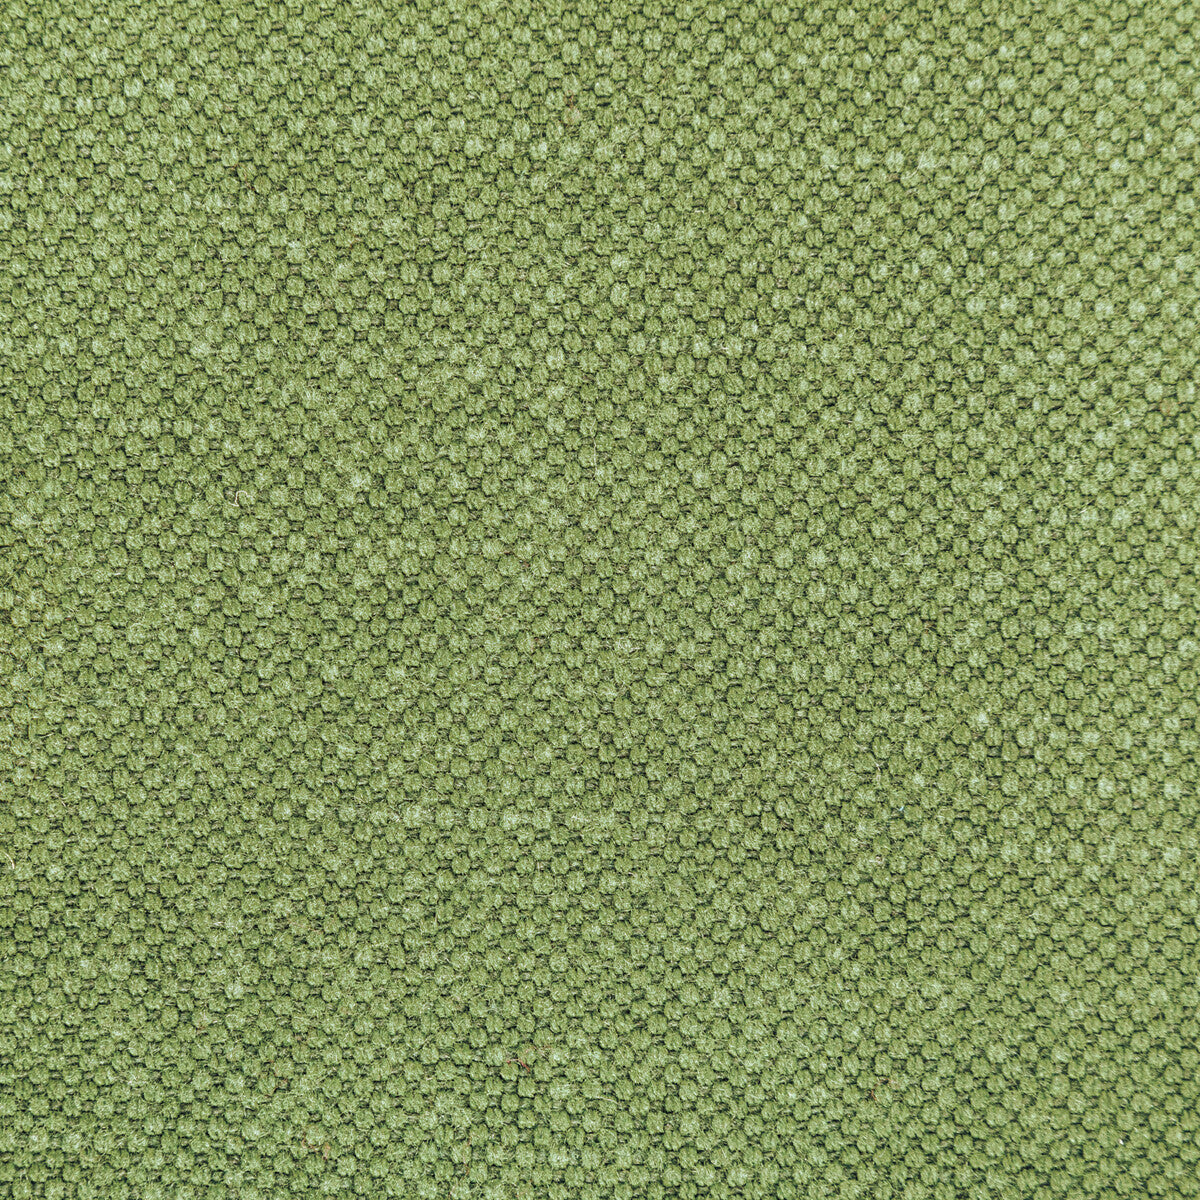 Carson fabric in frog color - pattern 36282.314.0 - by Kravet Basics